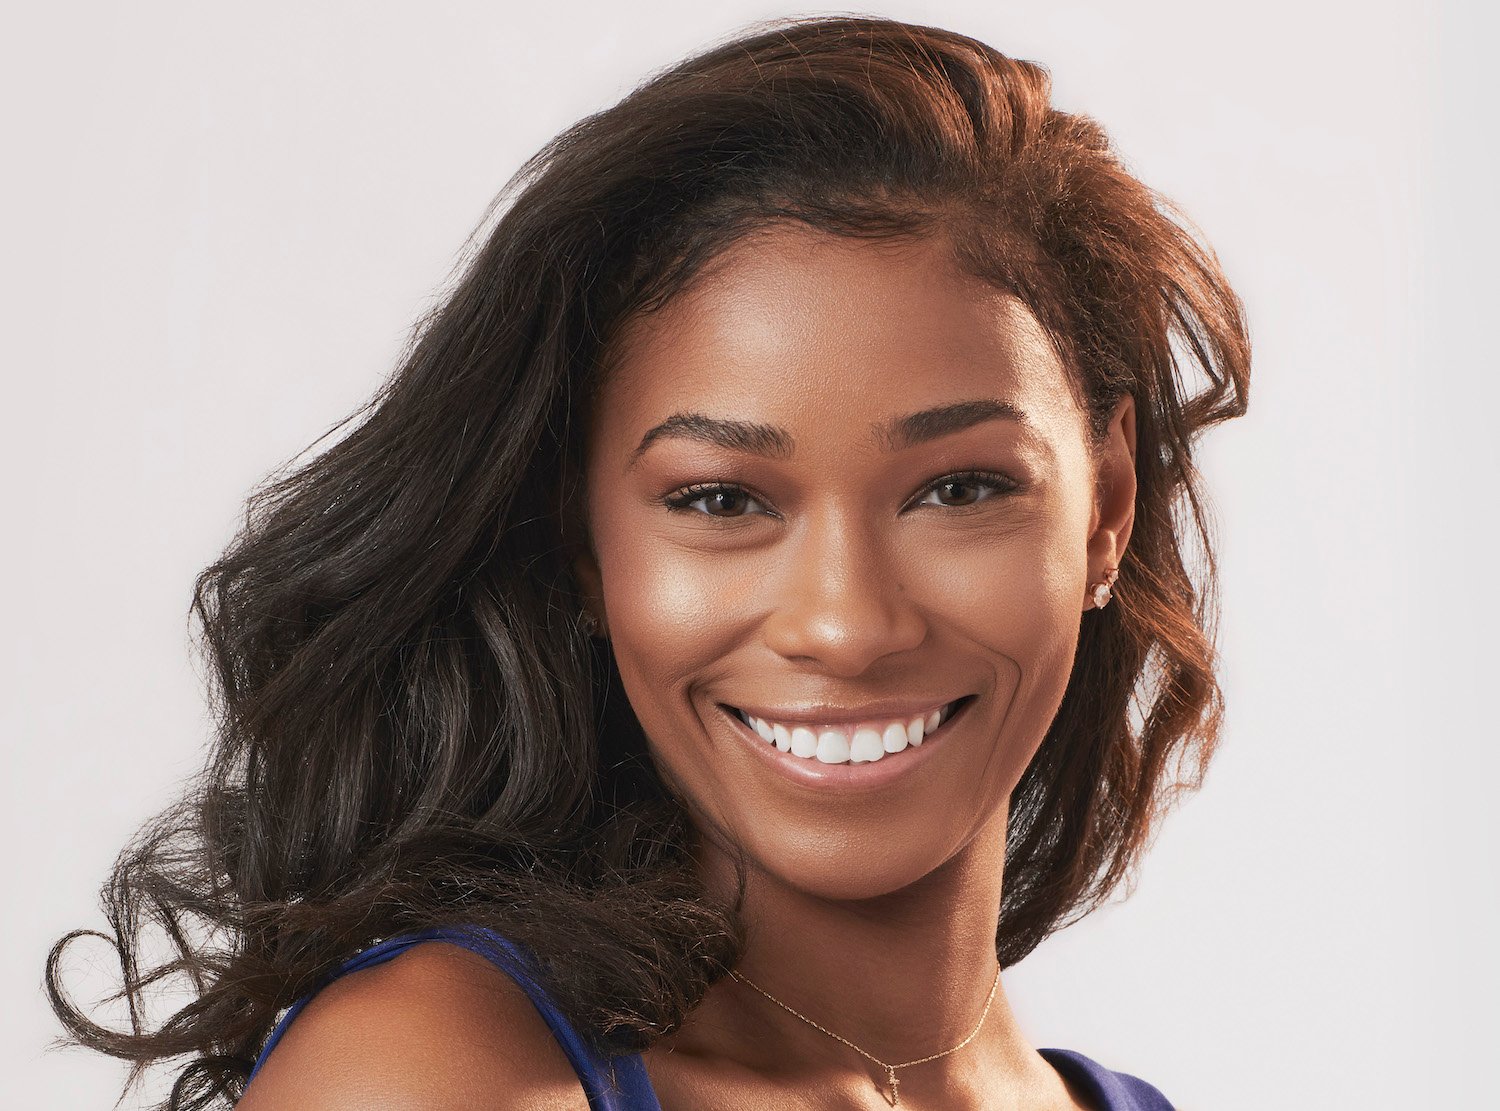 'The Bachelor' star Genevie Mayo in her official headshot for the series.